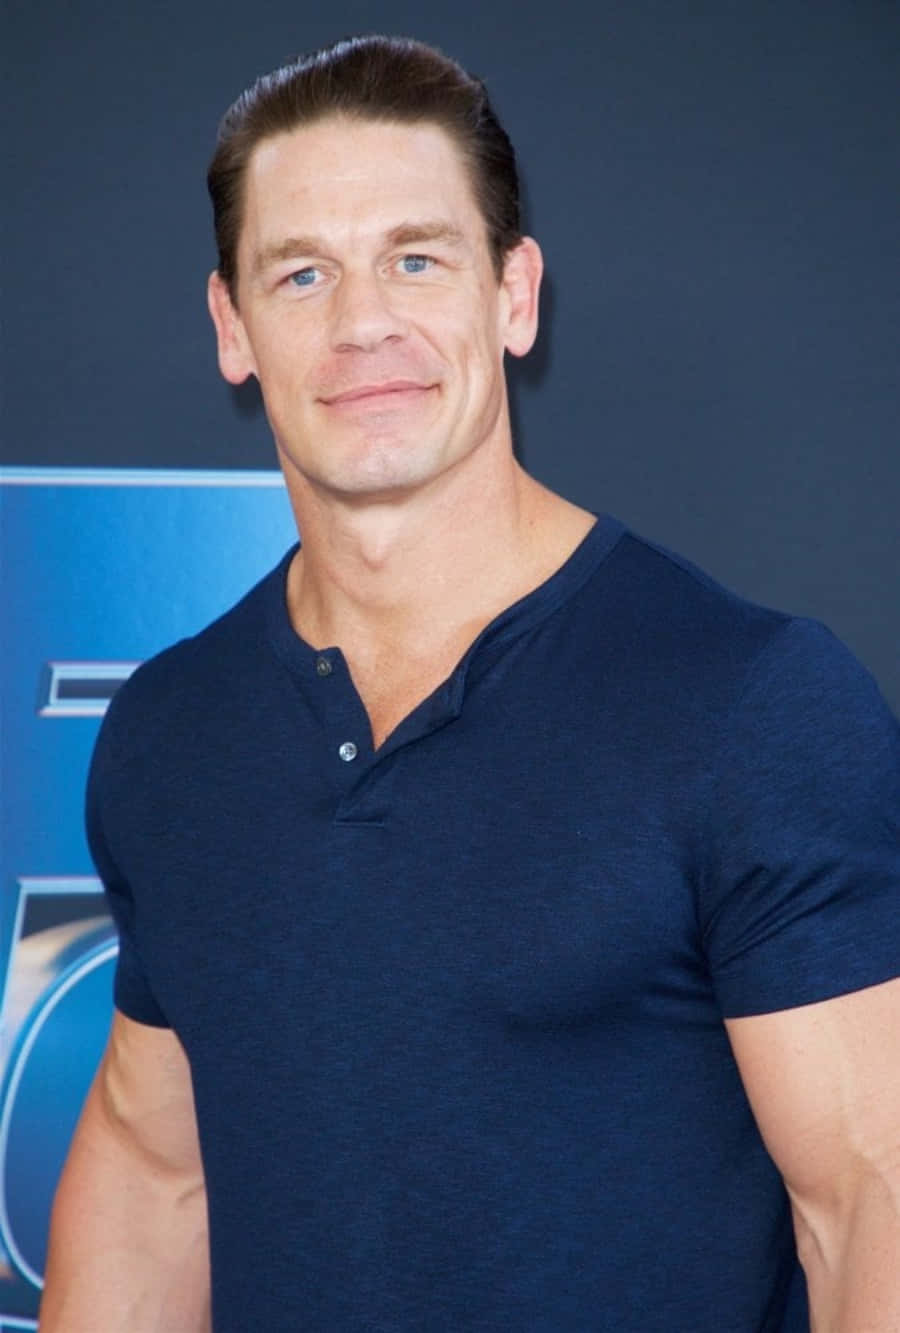 John Cena confidently posing at a WWE event against a dramatic background